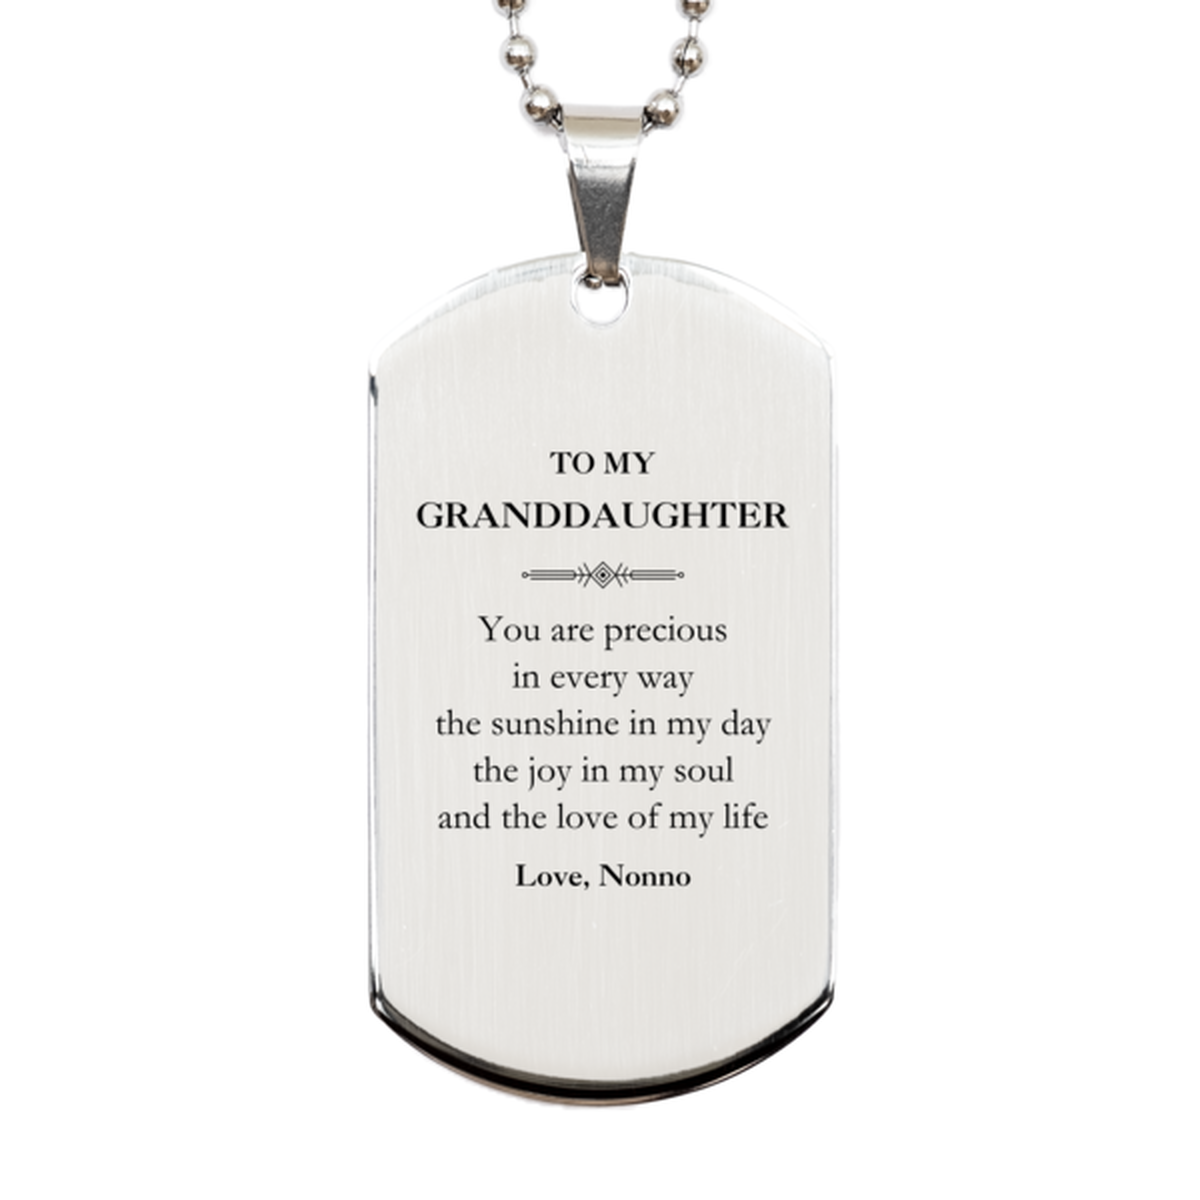 Graduation Gifts for Granddaughter Silver Dog Tag Present from Nonno, Christmas Granddaughter Birthday Gifts Granddaughter You are precious in every way the sunshine in my day. Love, Nonno